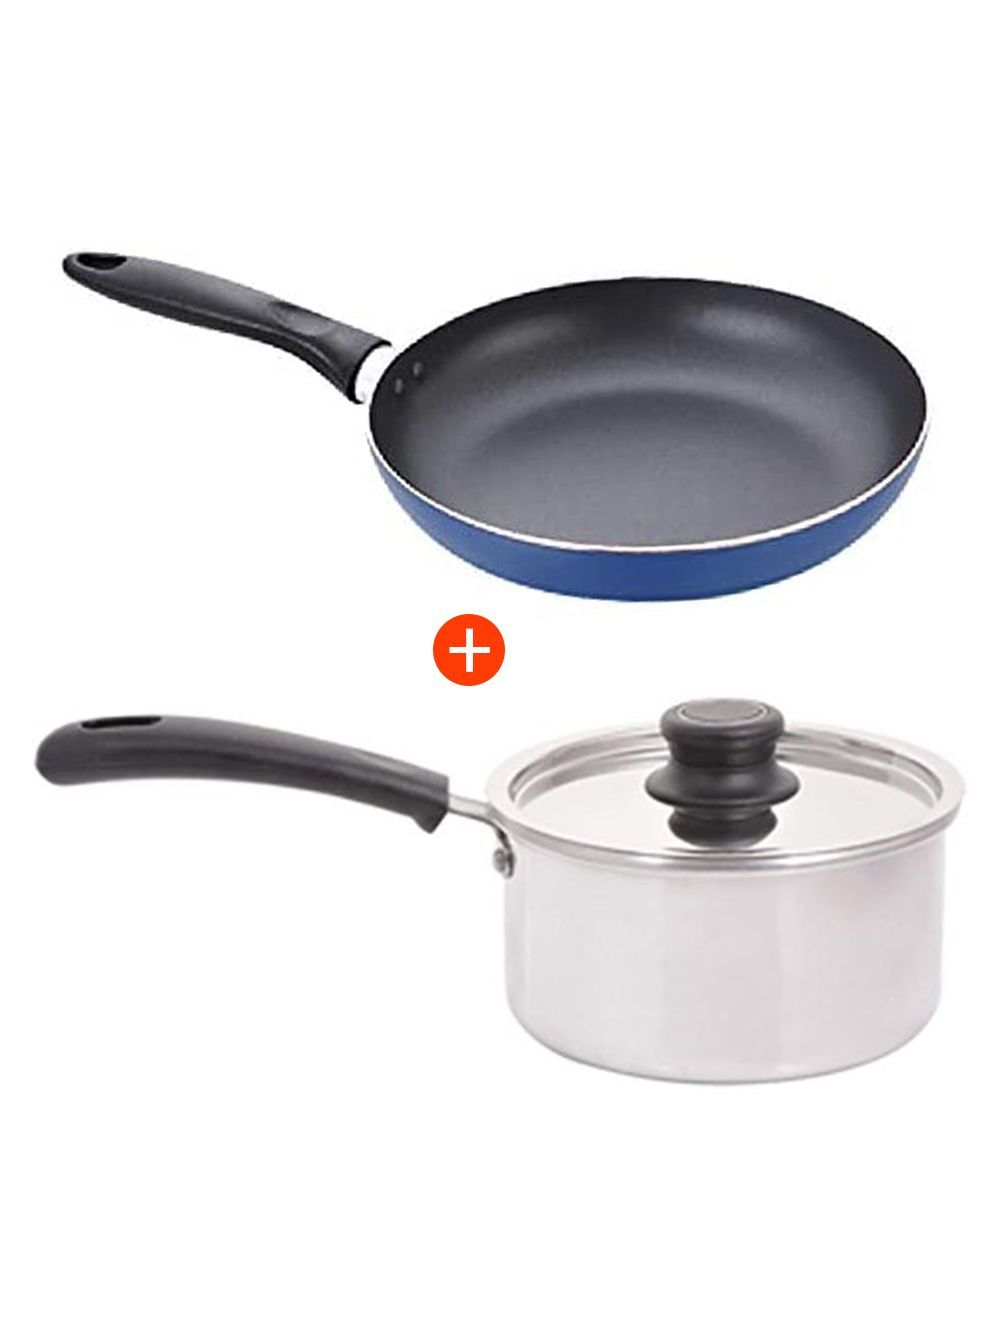 Combo Of Raj Aluminium Saucepan With Cover And Non-Stick Induction Frypan-KSP00S+RNF001